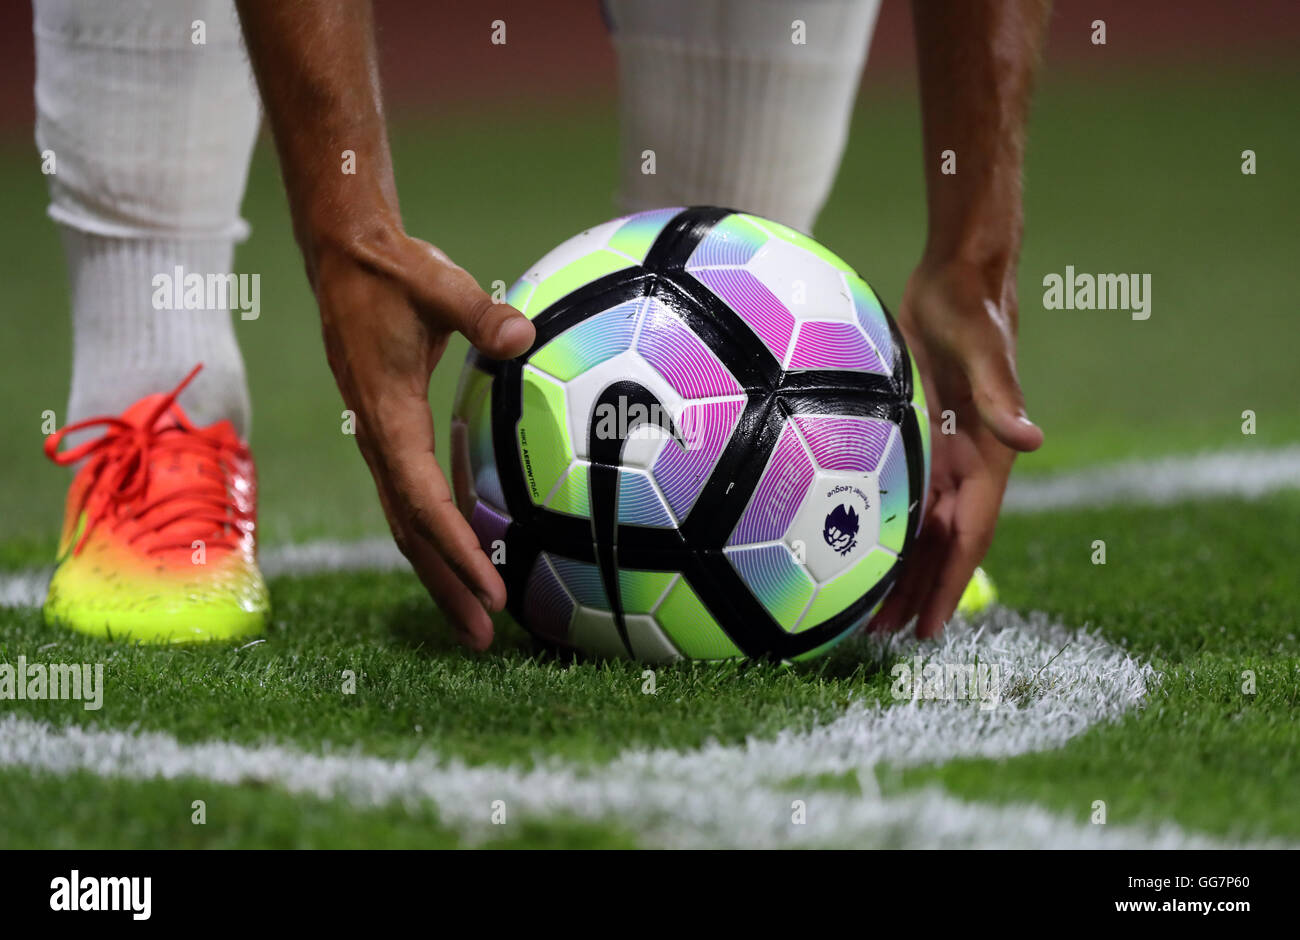 An Espanyol player places the new Nike Ordem 2016-17 Premier League match  ball in the corner during the pre-season match at St Mary's Stadium,  Southampton Stock Photo - Alamy